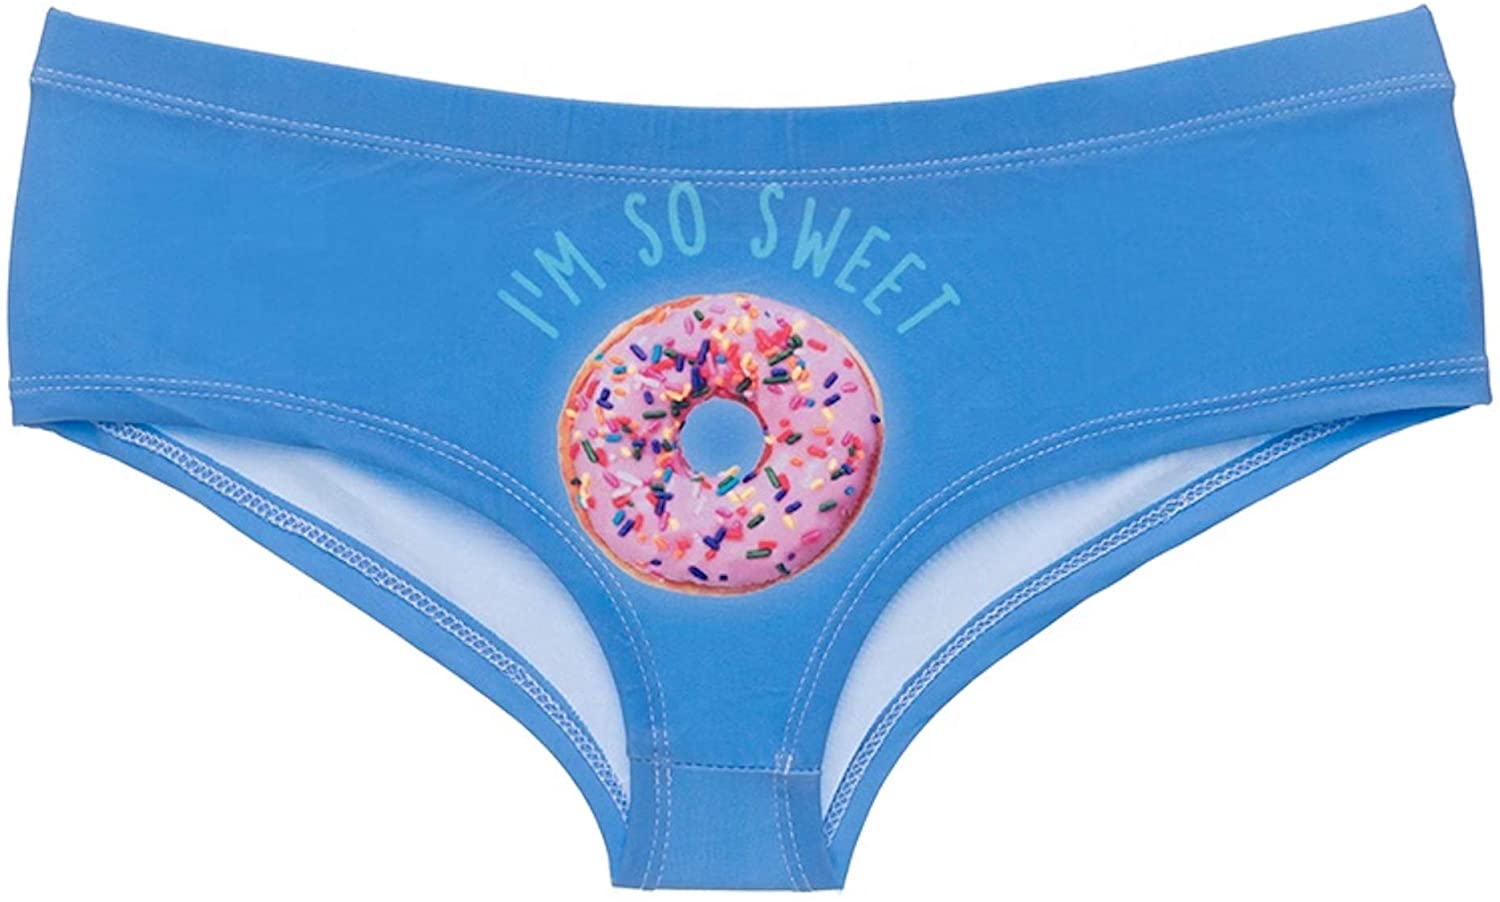 Jelly Bean Sweets - Knickers or Thong Sexy Yummy Funny Gift Underwear  Beautiful Present Womens Designer Panties